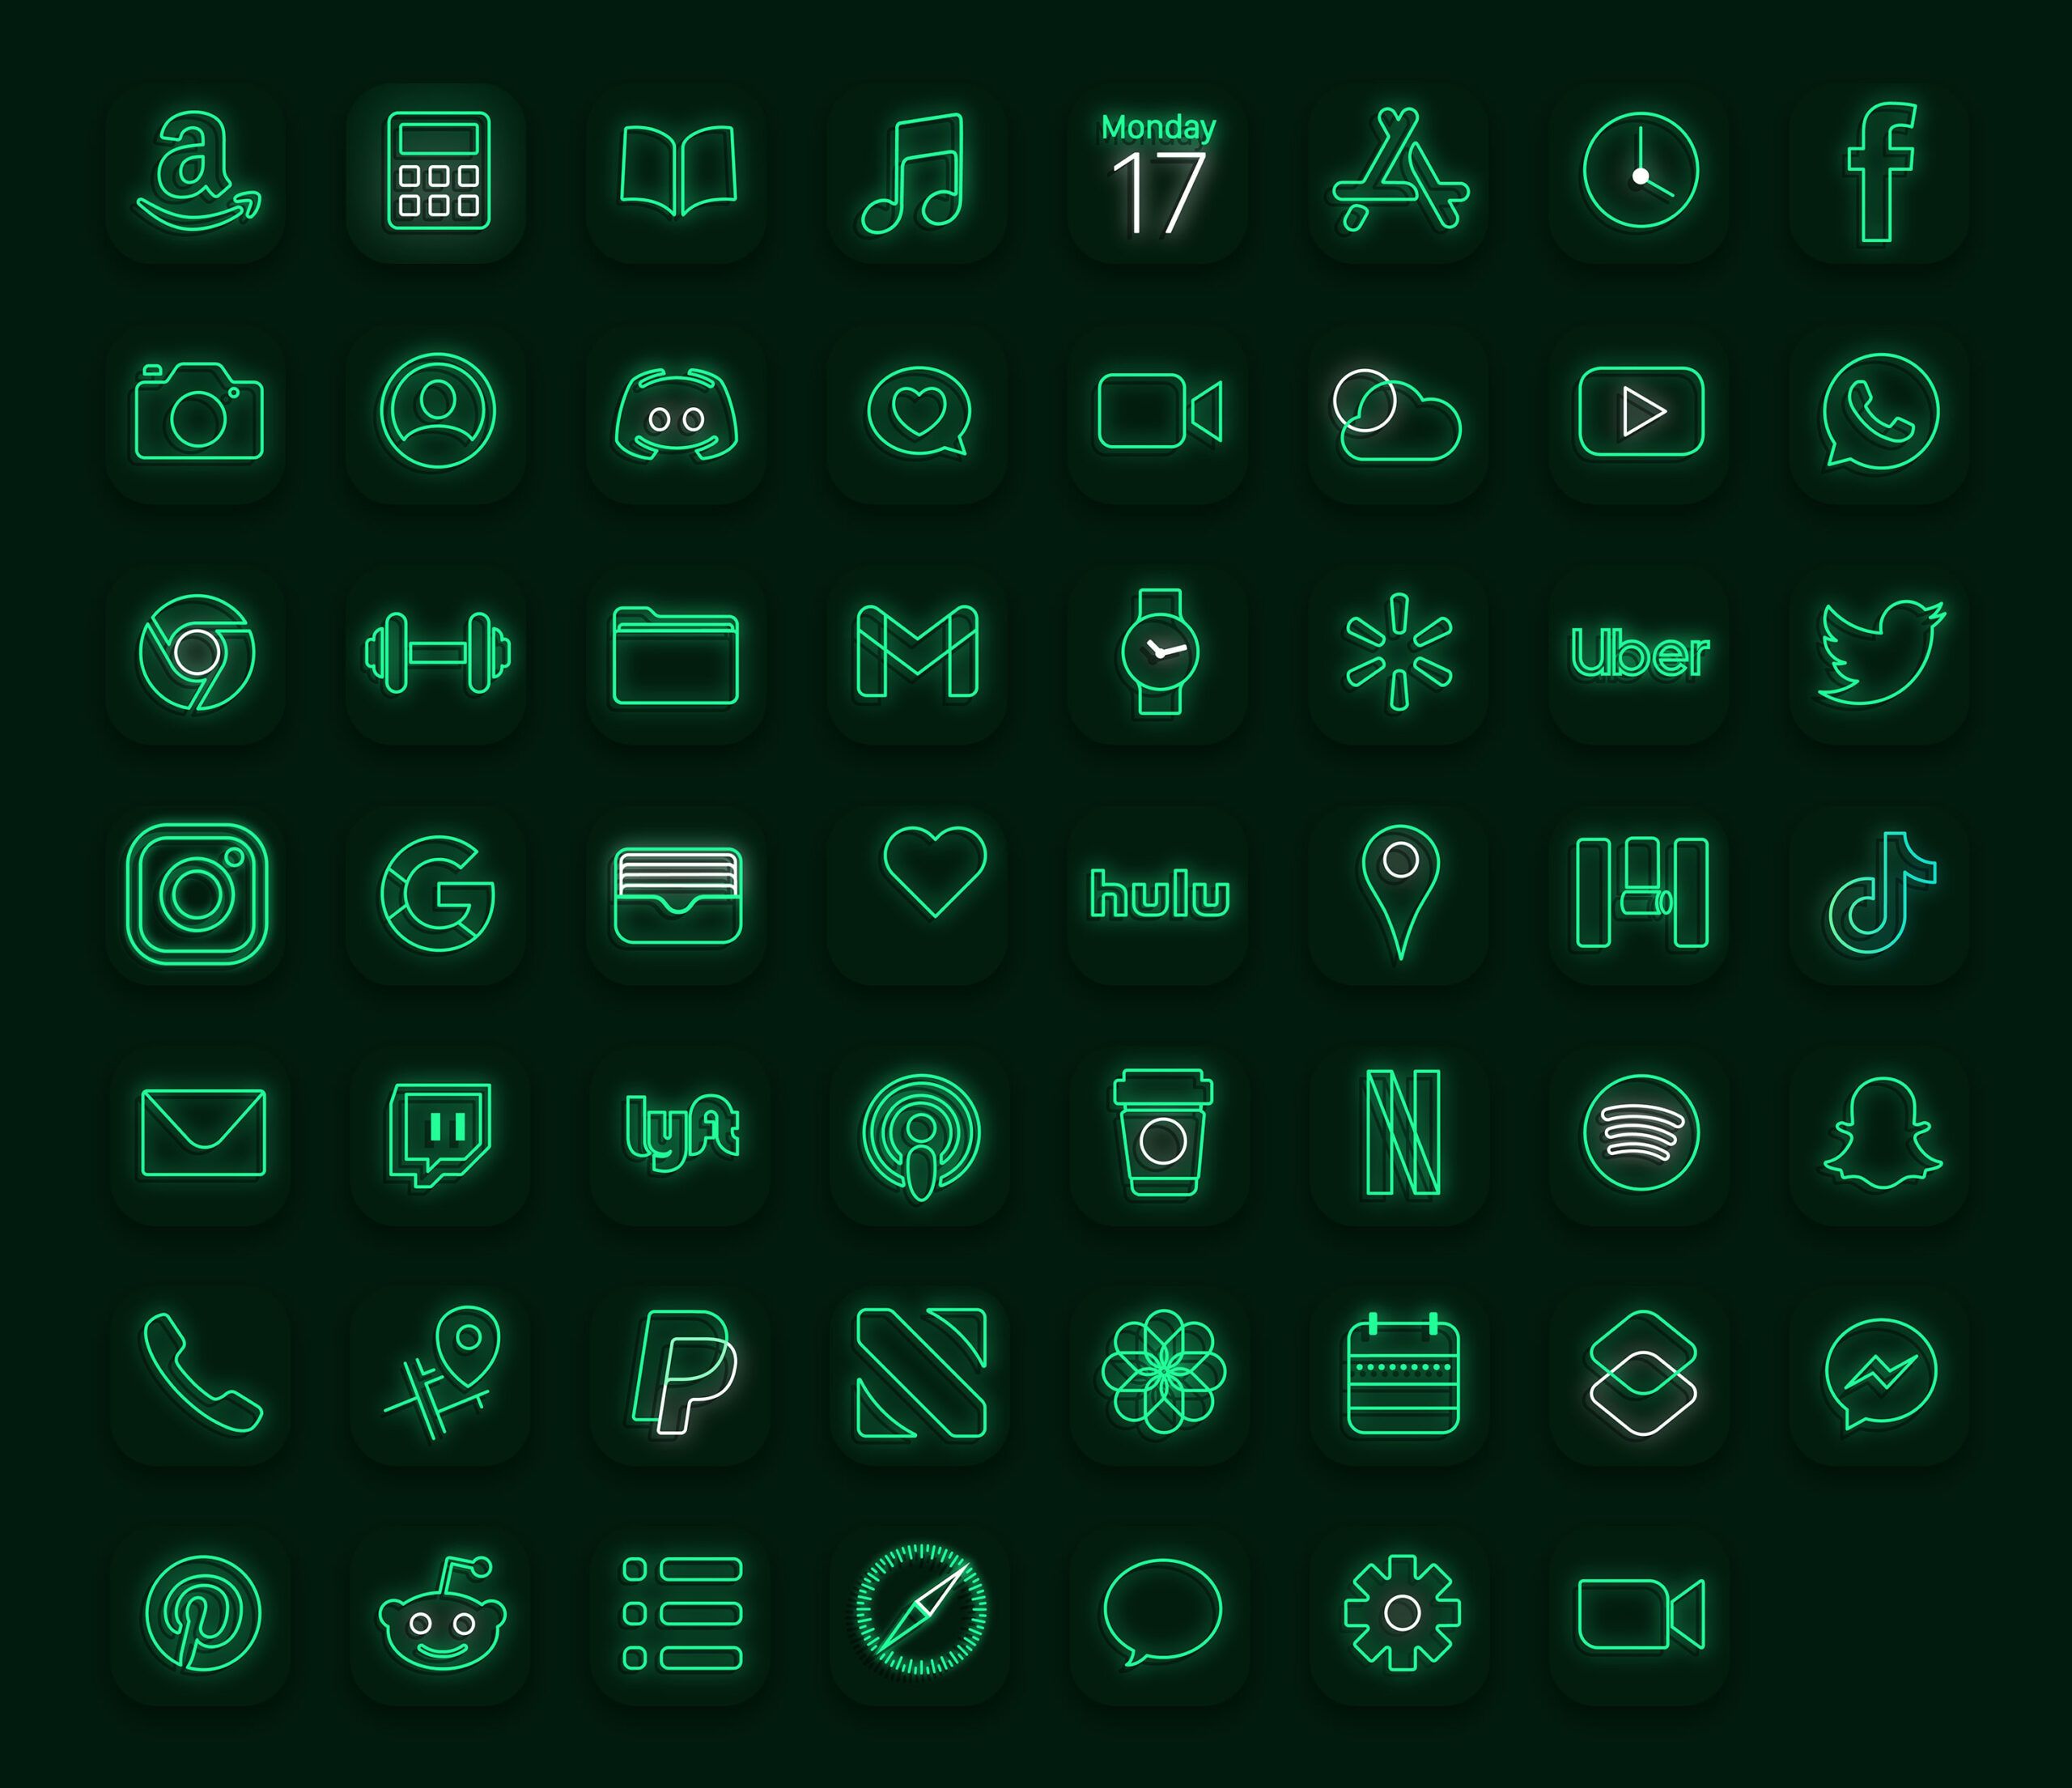 Set of neon social media icons on a dark background - Lime green